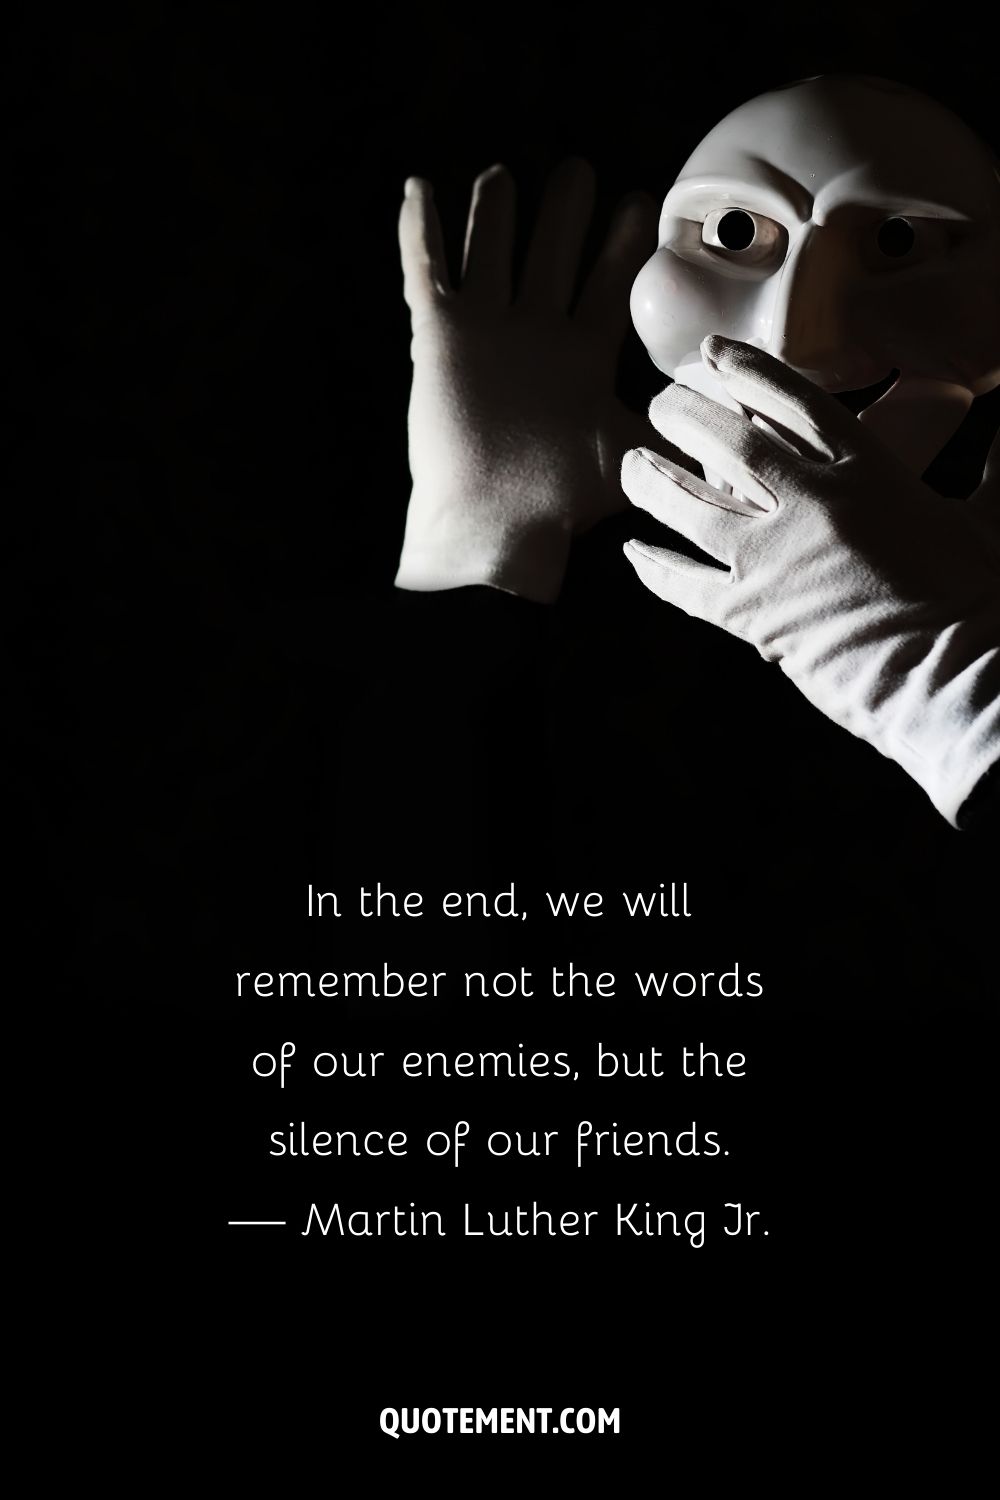 In the end, we will remember not the words of our enemies, but the silence of our friends.